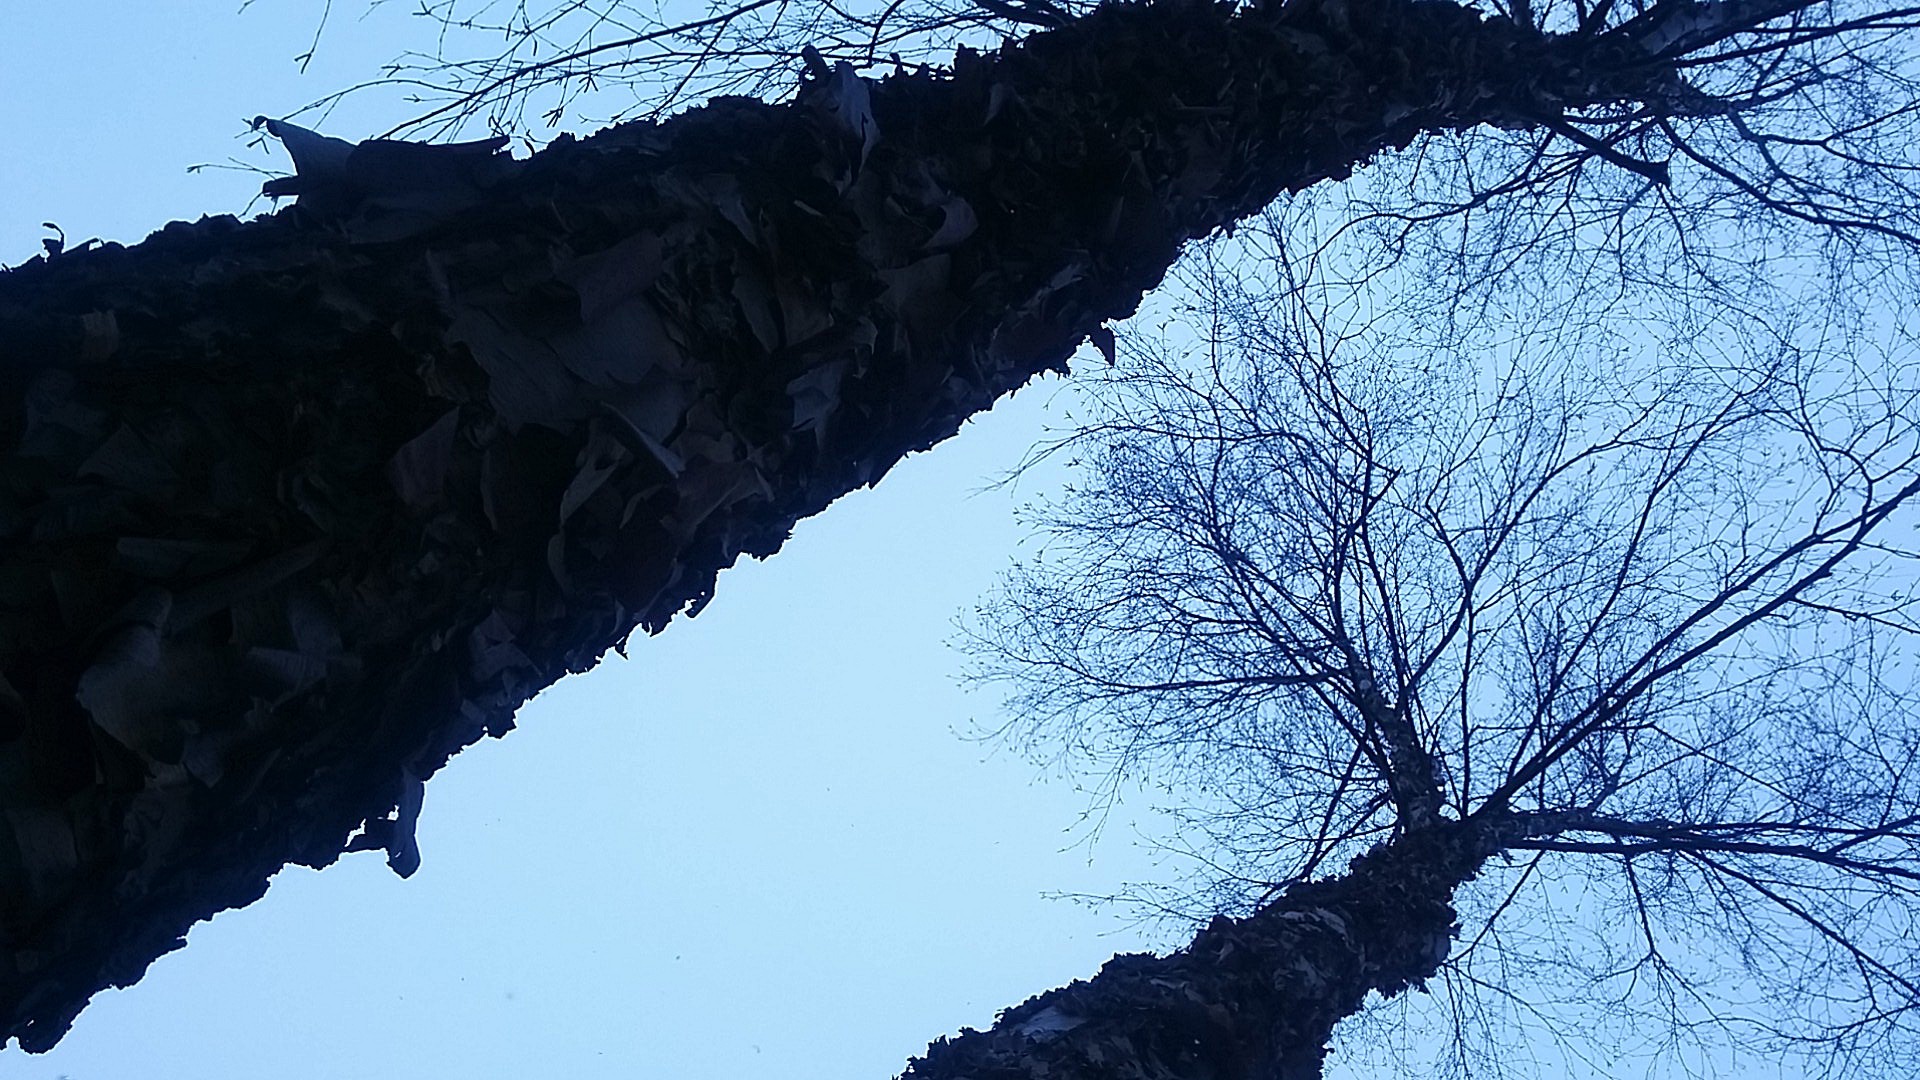 Looking up at two tall birch trees with peeling barks. Photo taken in Winter, so there are no leaves on the branches. The trees appear as silhouettes due to the low light of the evening. Their tops are visible, with branches extending from the barks.